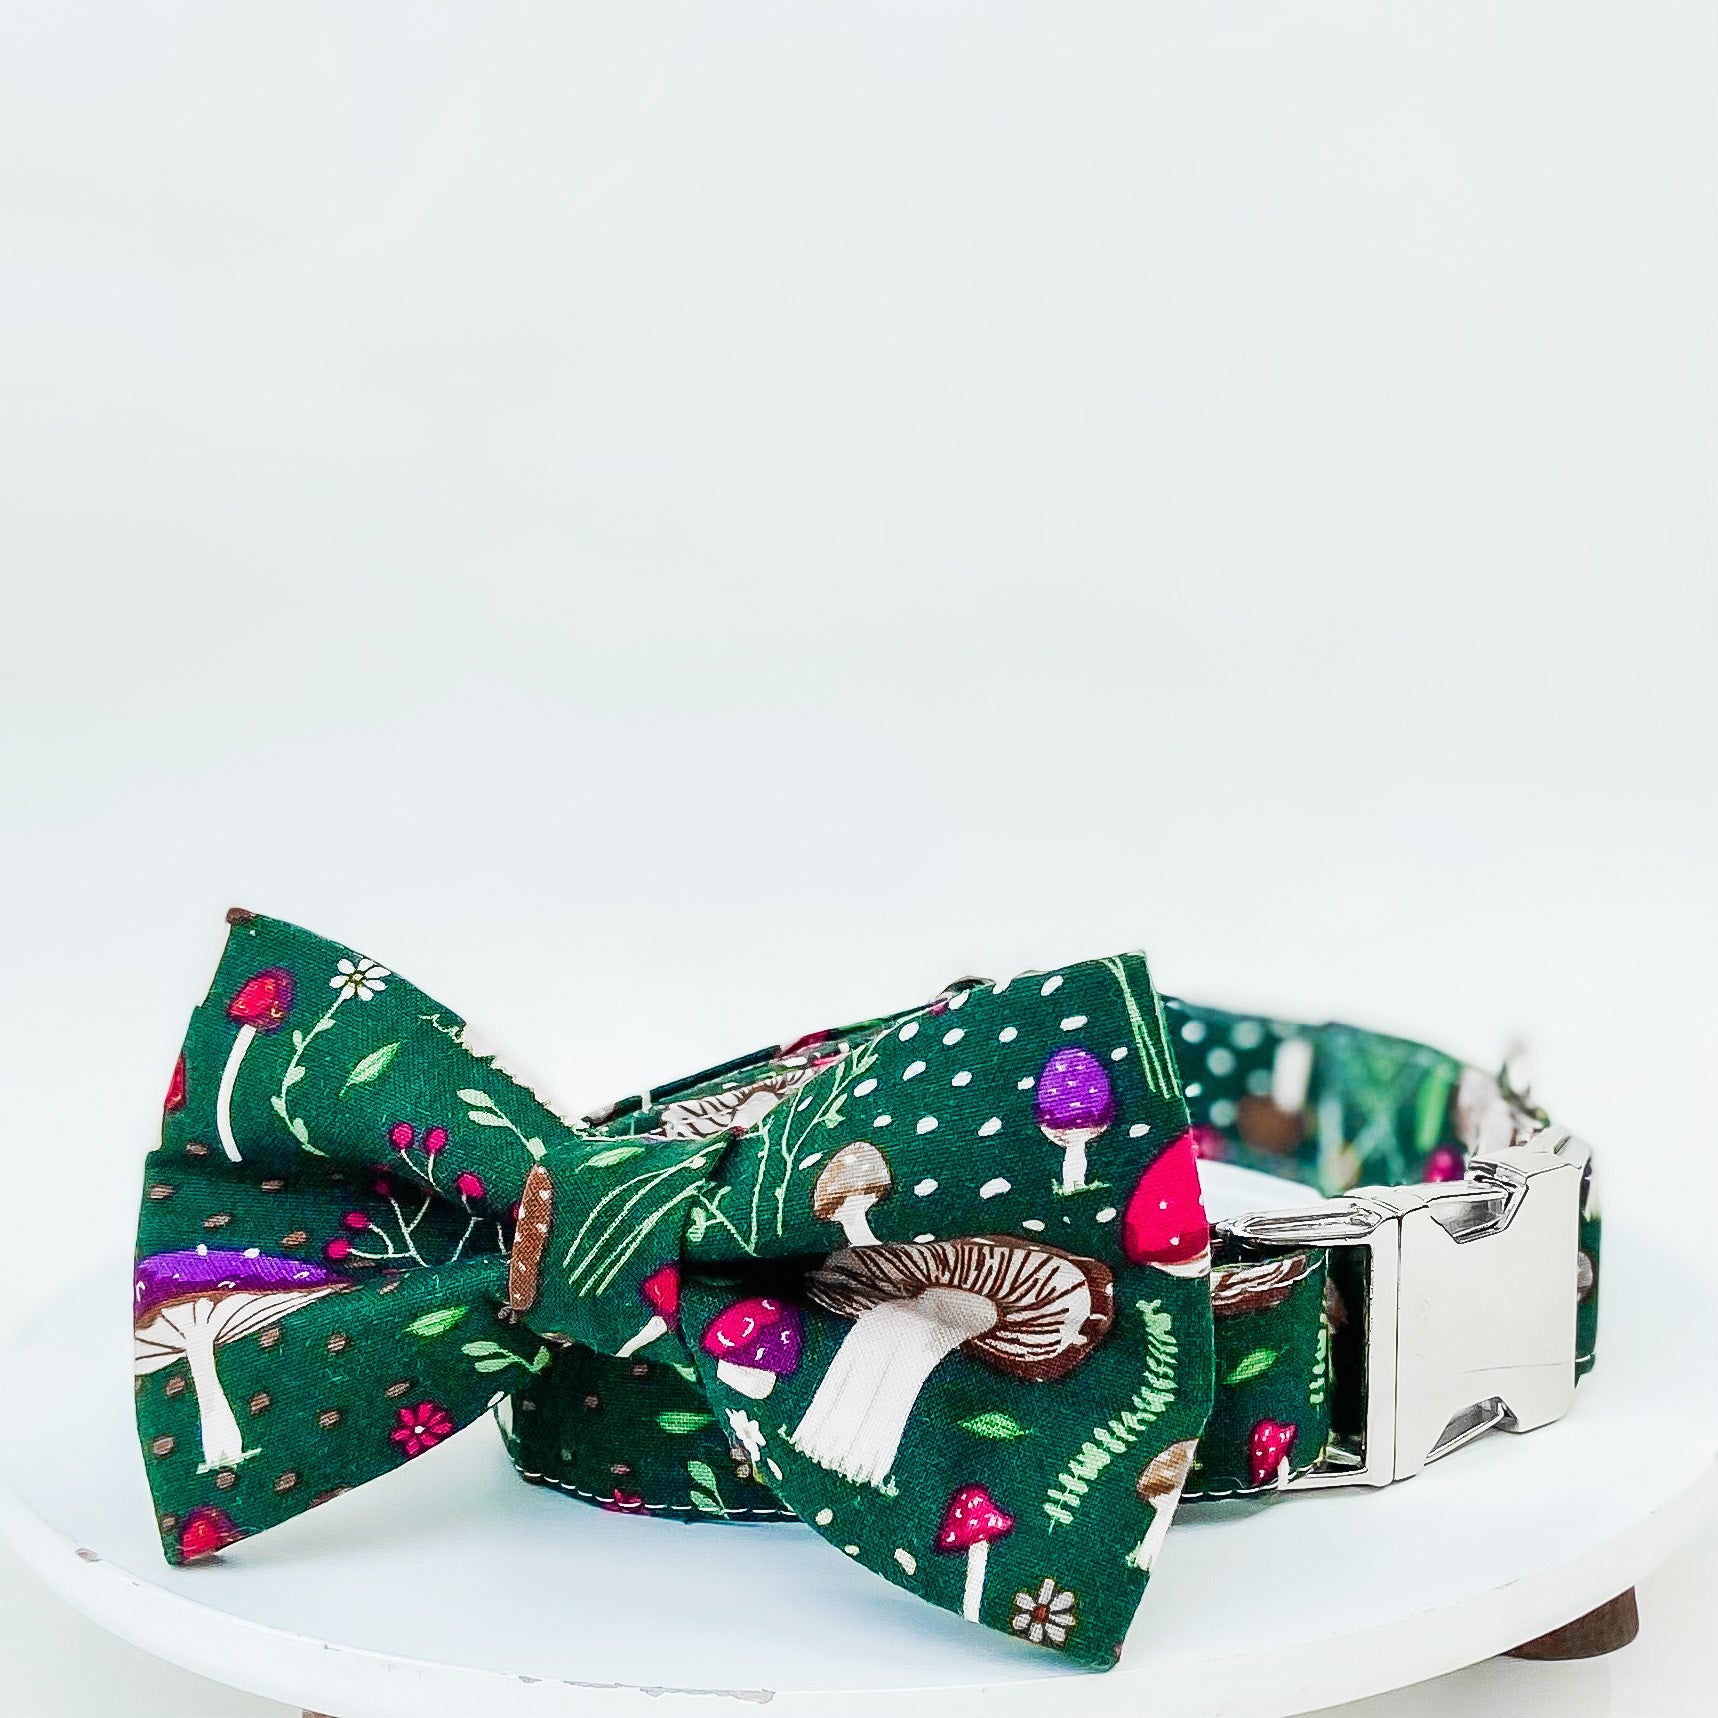 Foraging mushroom forest green fall dog collar with silver hardware